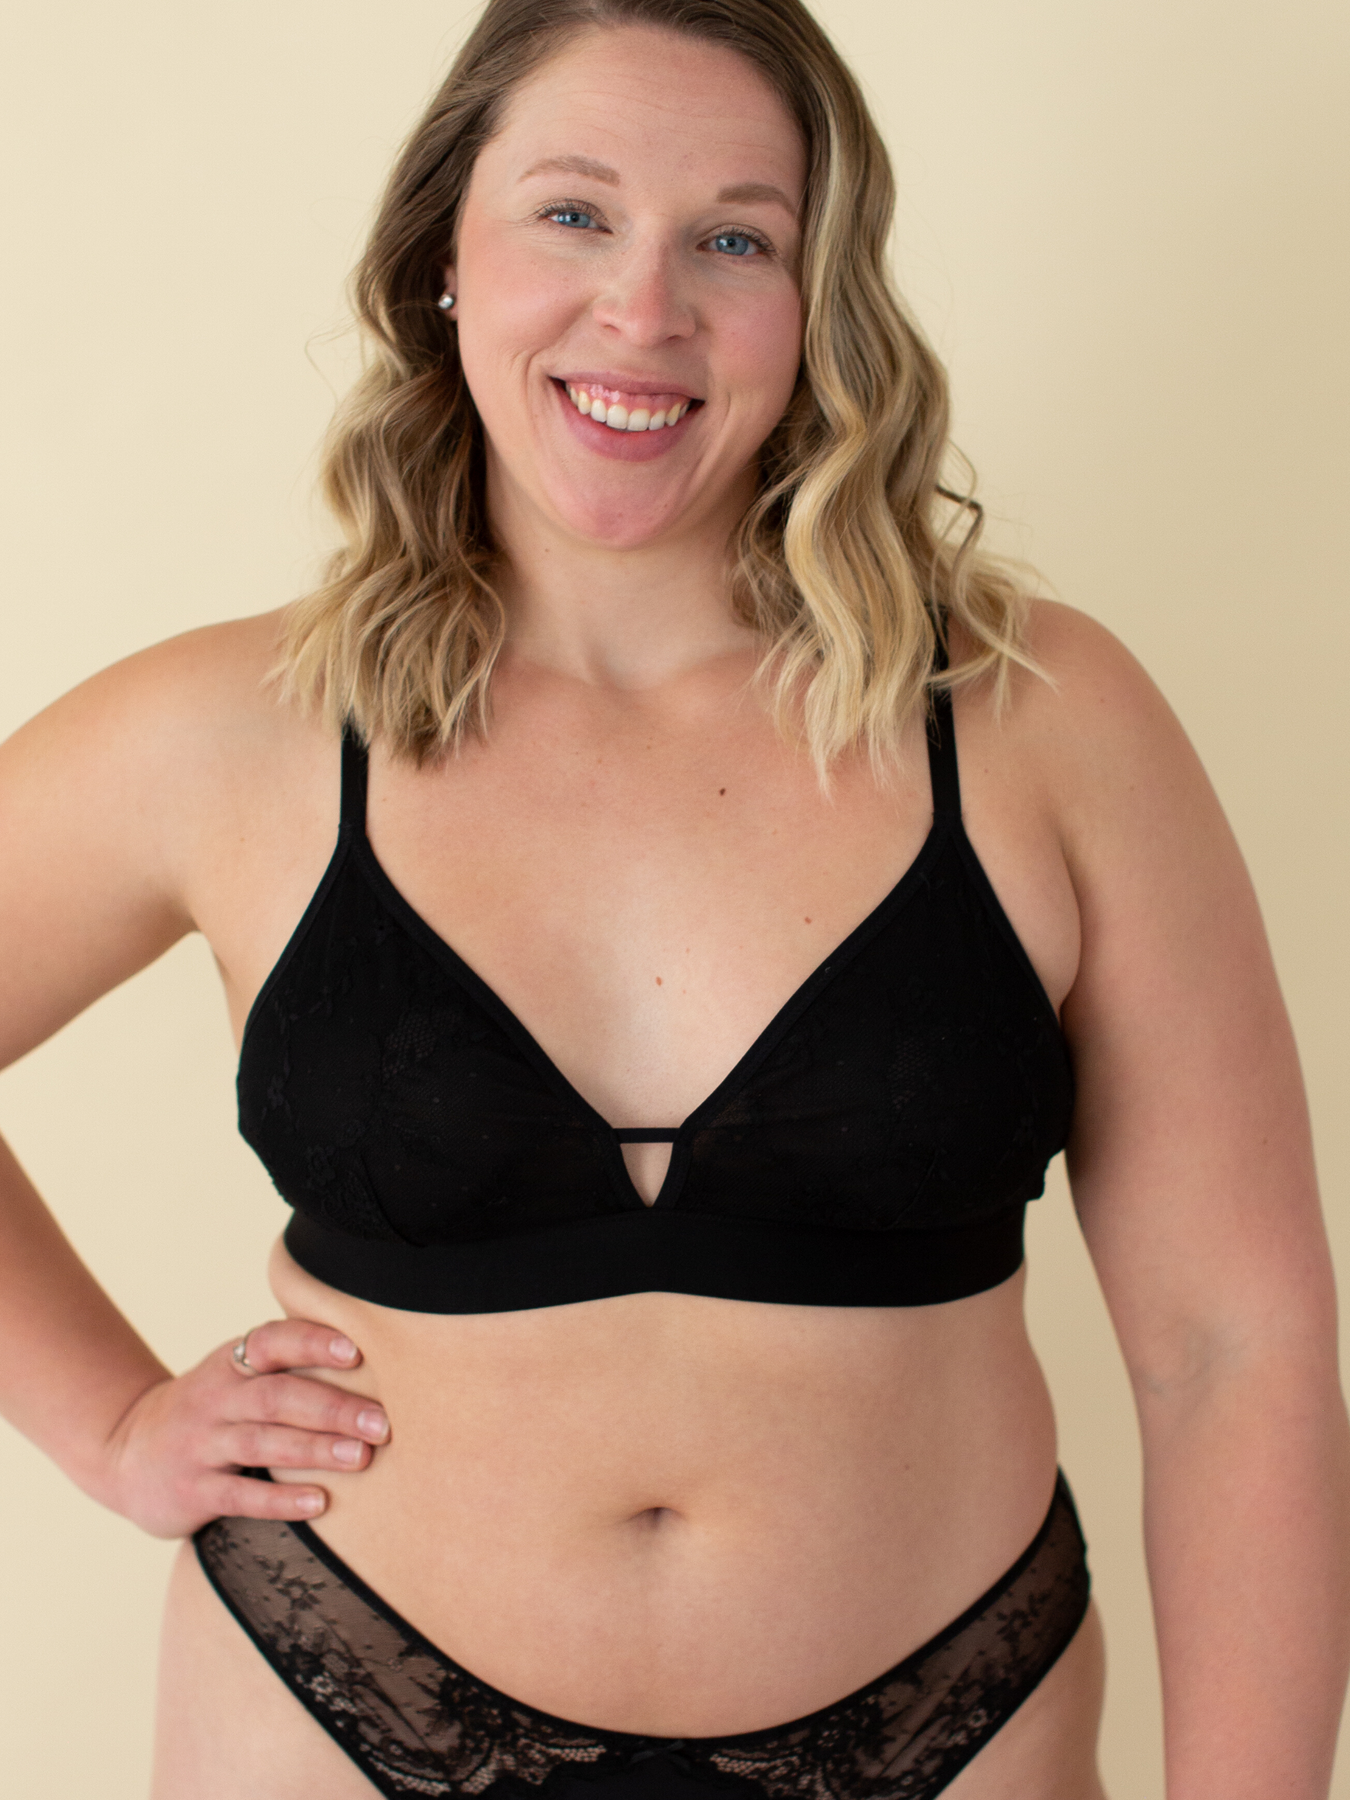 RQYYD Reduced Lace Wireless Bra, Comfortable Full-Coverage